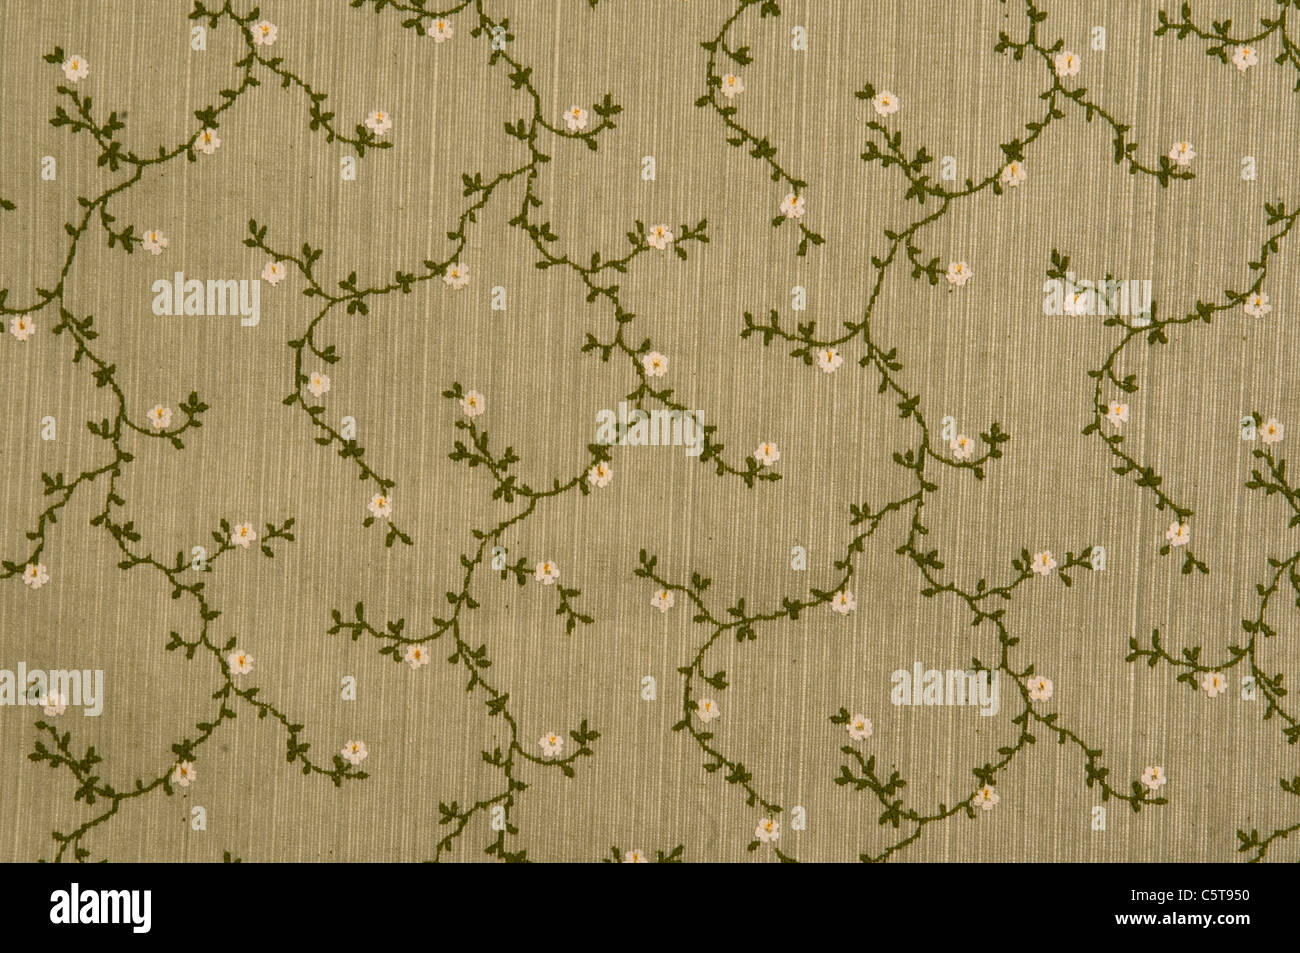 Floral fabric wallpaper, full frame Stock Photo